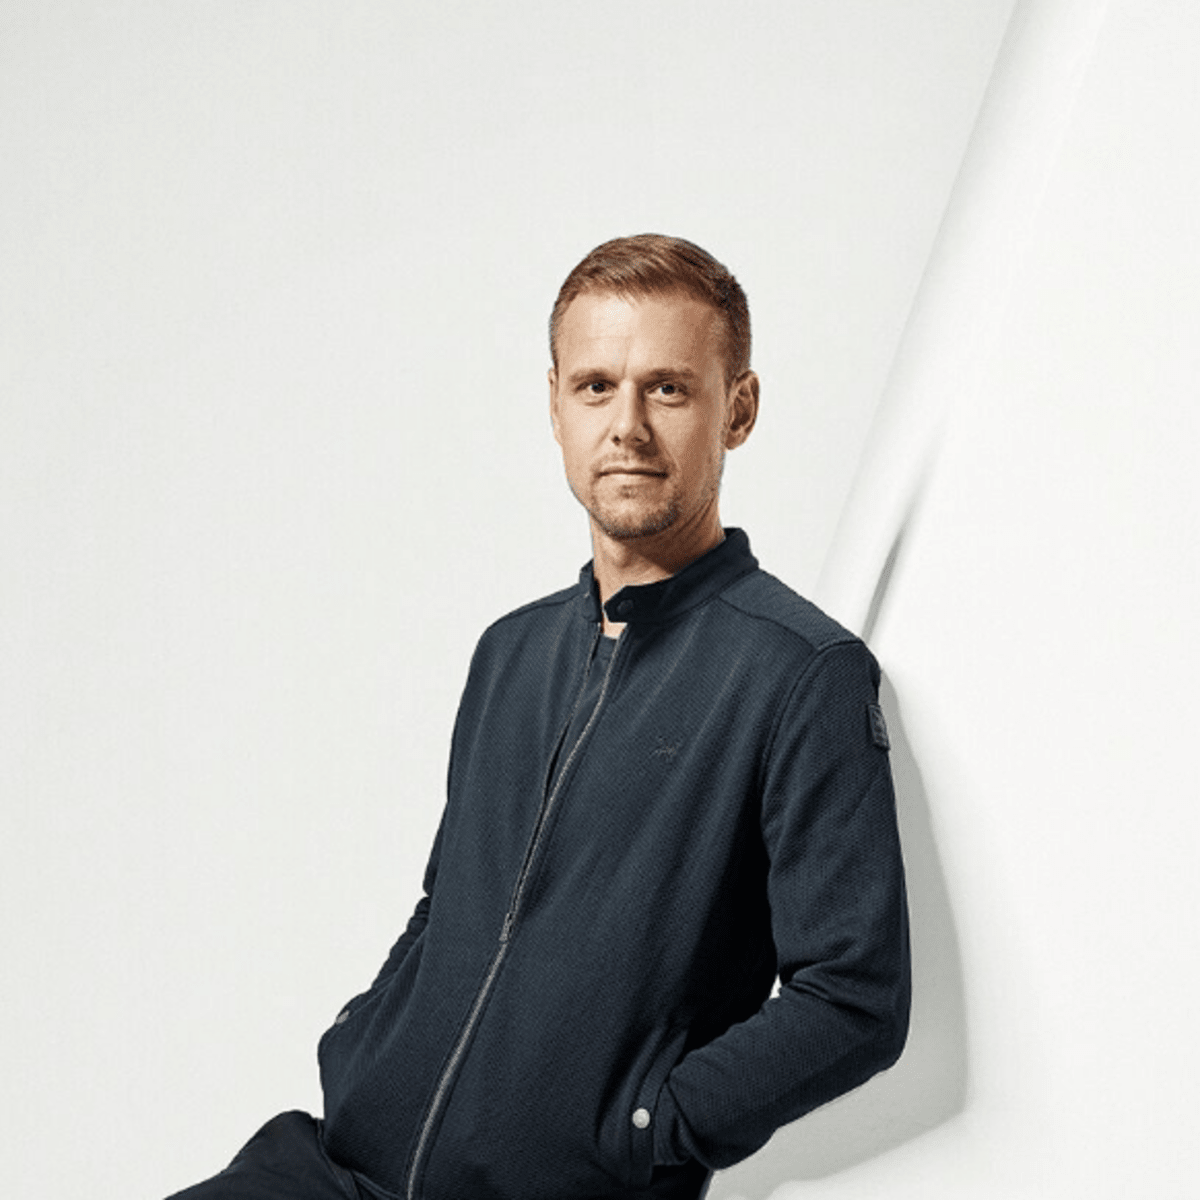 Armin Van Buuren And Shapov Complete Their Trilogy Ep With New Collaboration Edm Com The Latest Electronic Dance Music News Reviews Artists armin van buuren and shapov complete